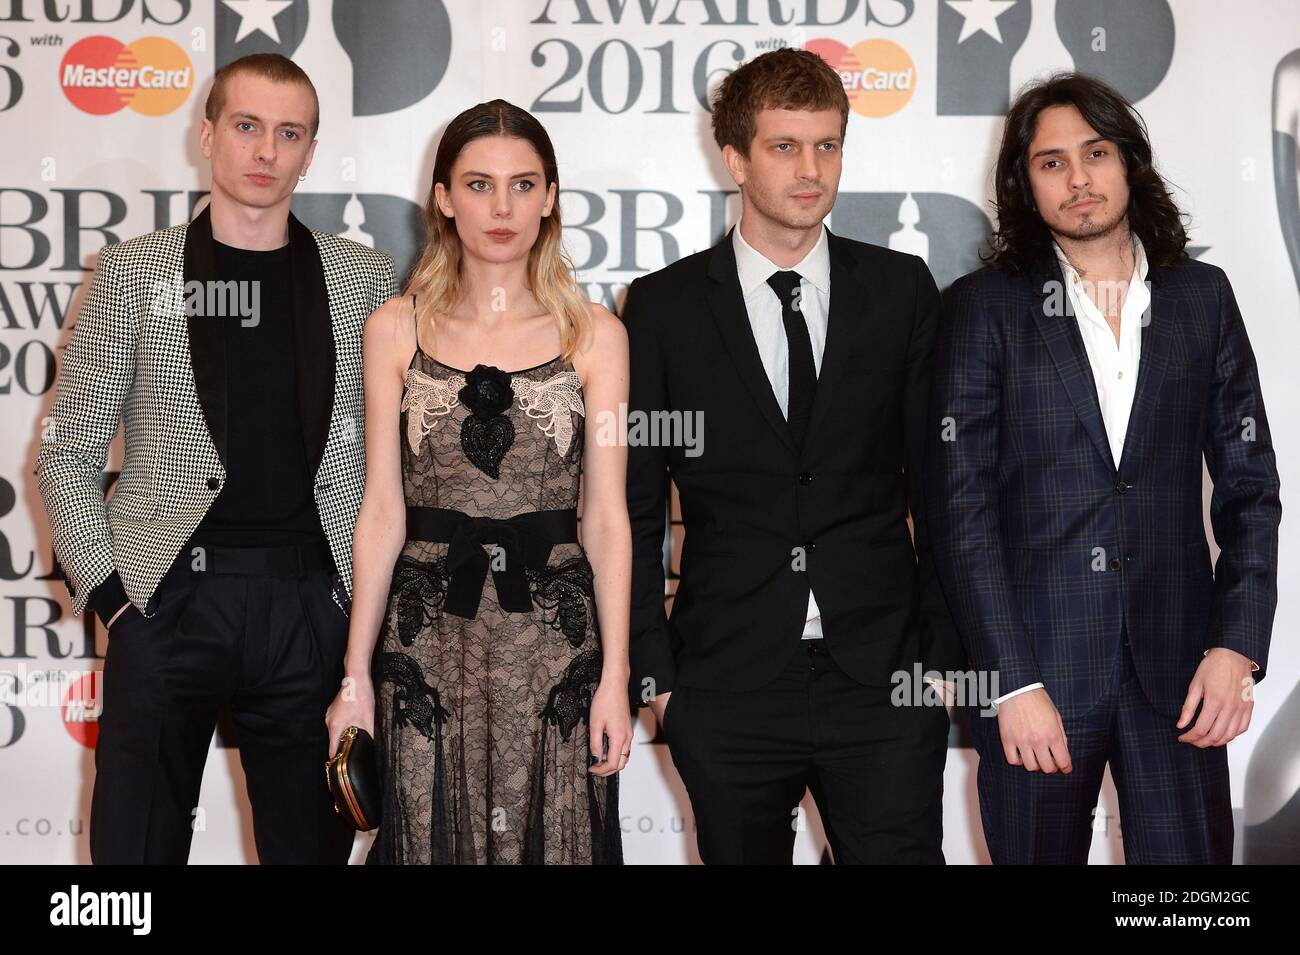 (L - R) Theo Ellis, Ellie Rowsell, Joff Oddie, Joel Amey of Wolf Alice arriving for the 2016 Brit Awards at the O2 Arena, London. Stock Photo